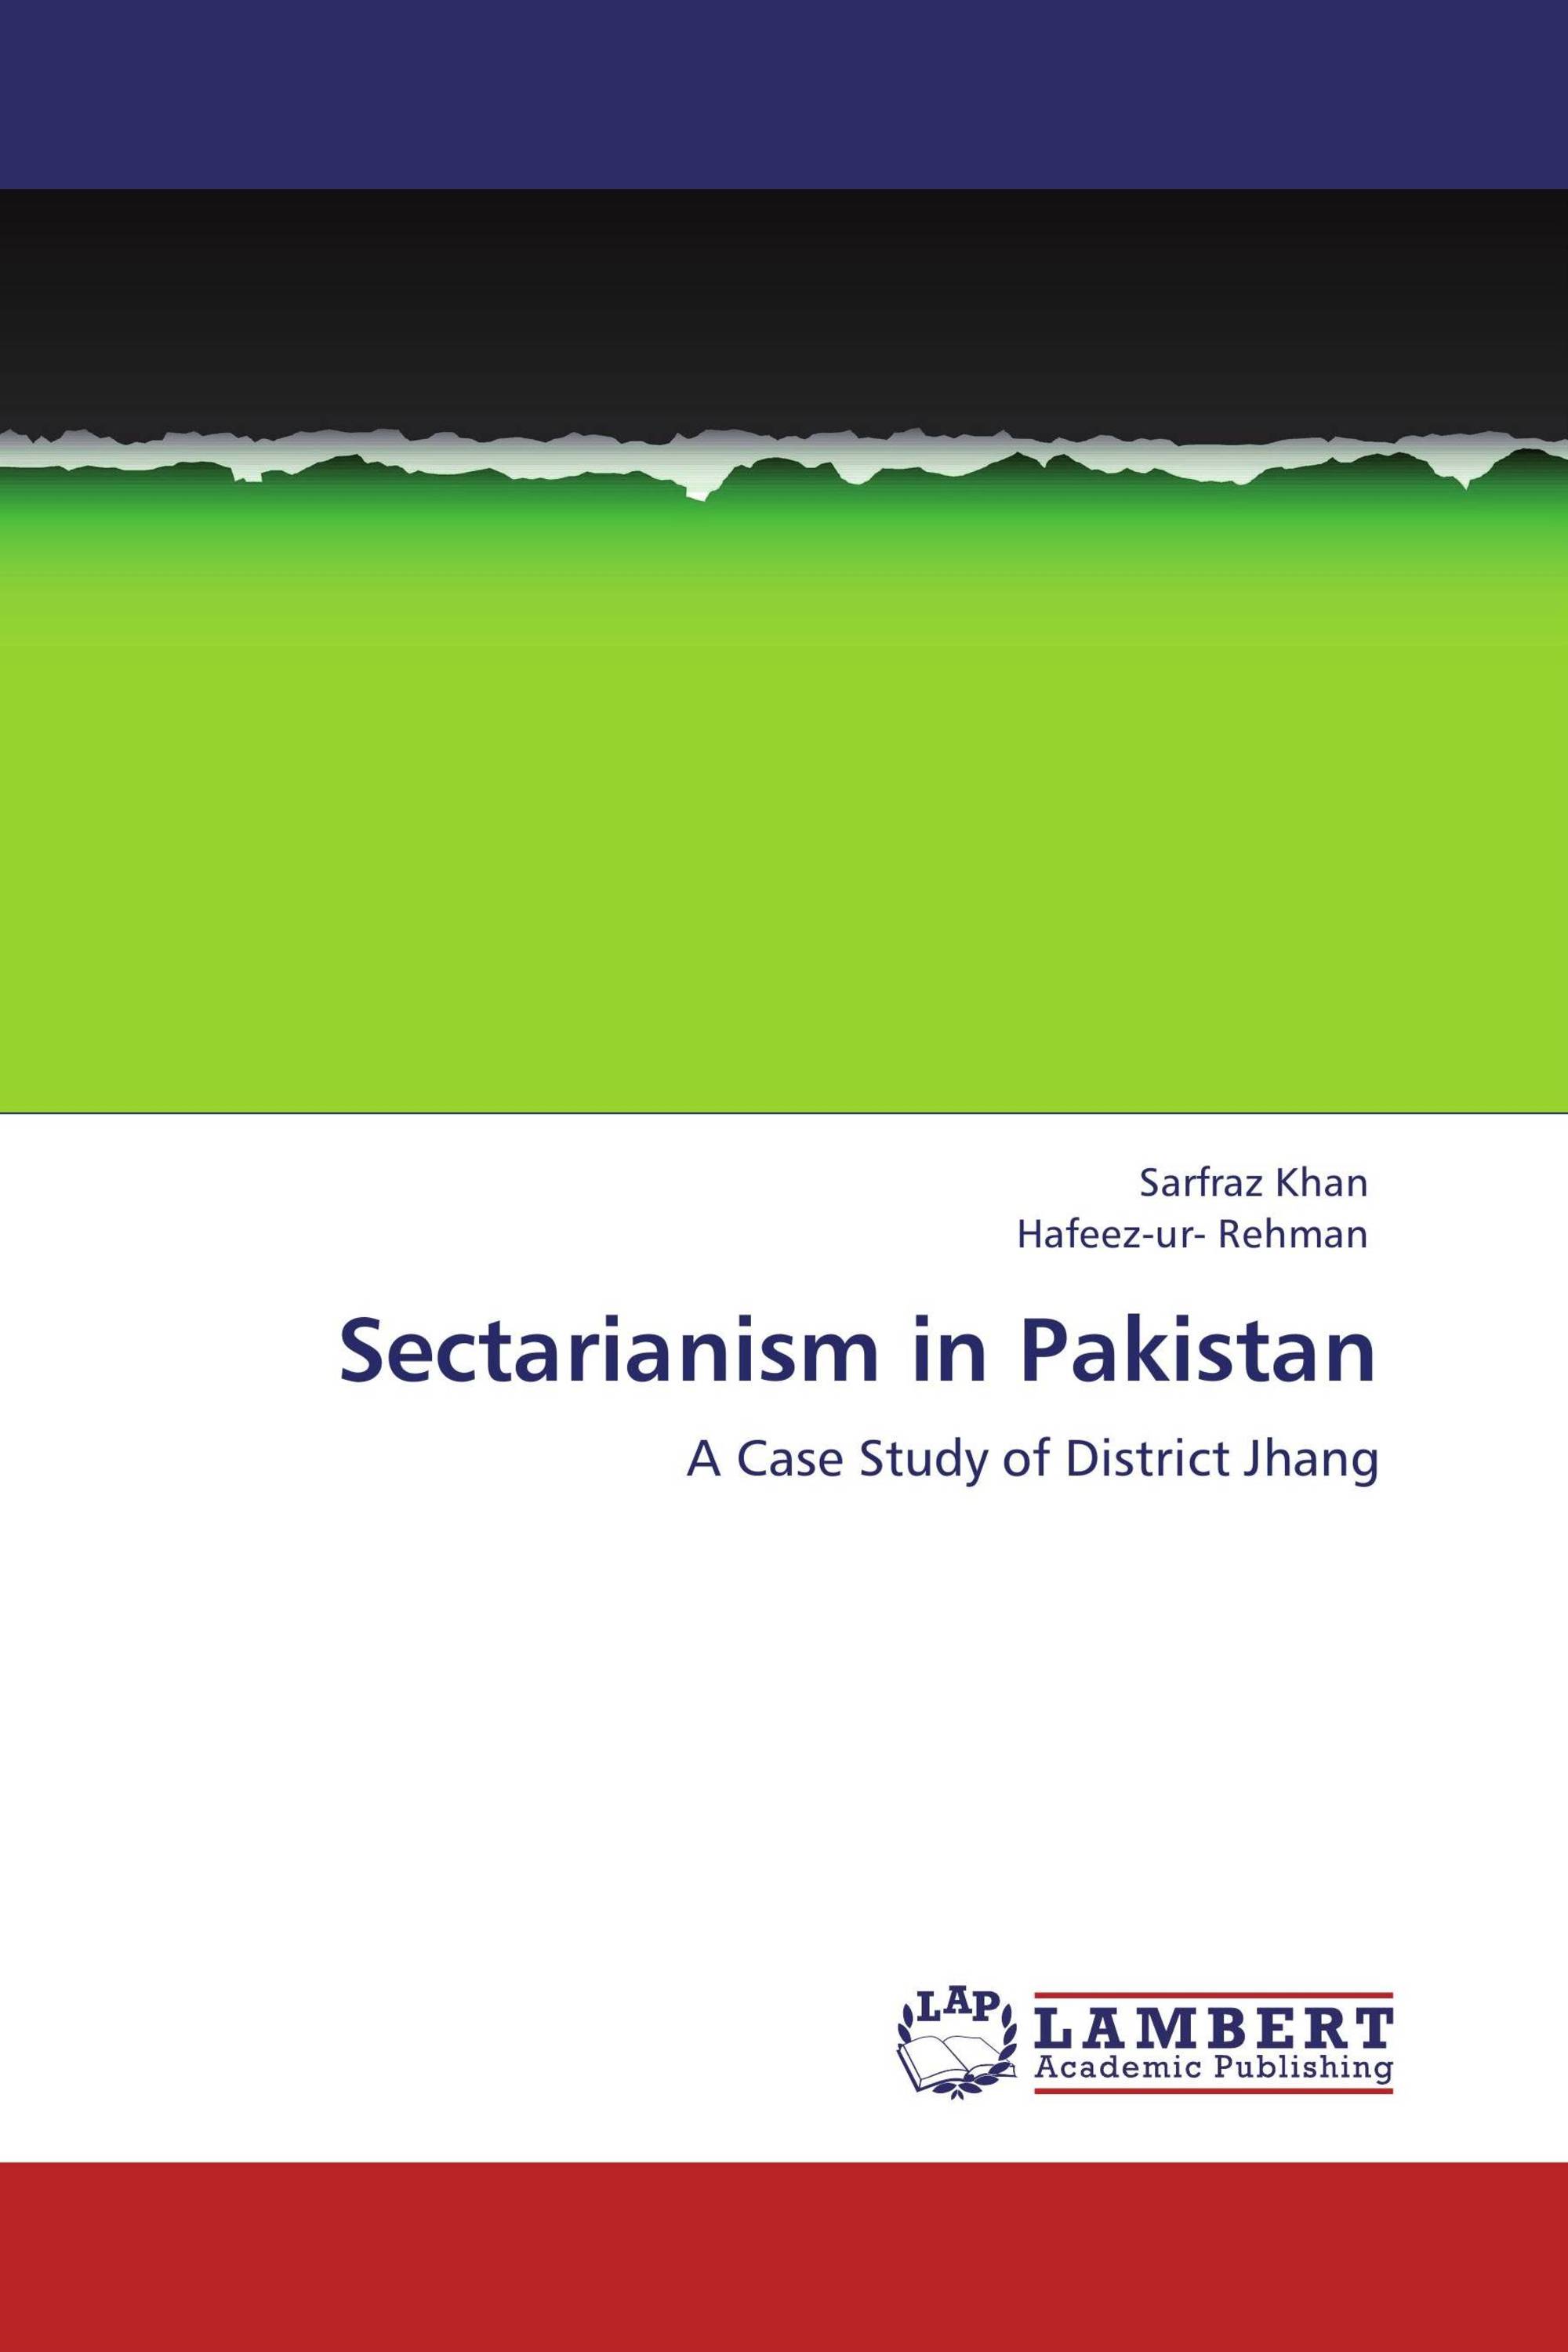 Sectarianism Islam and Pakistan